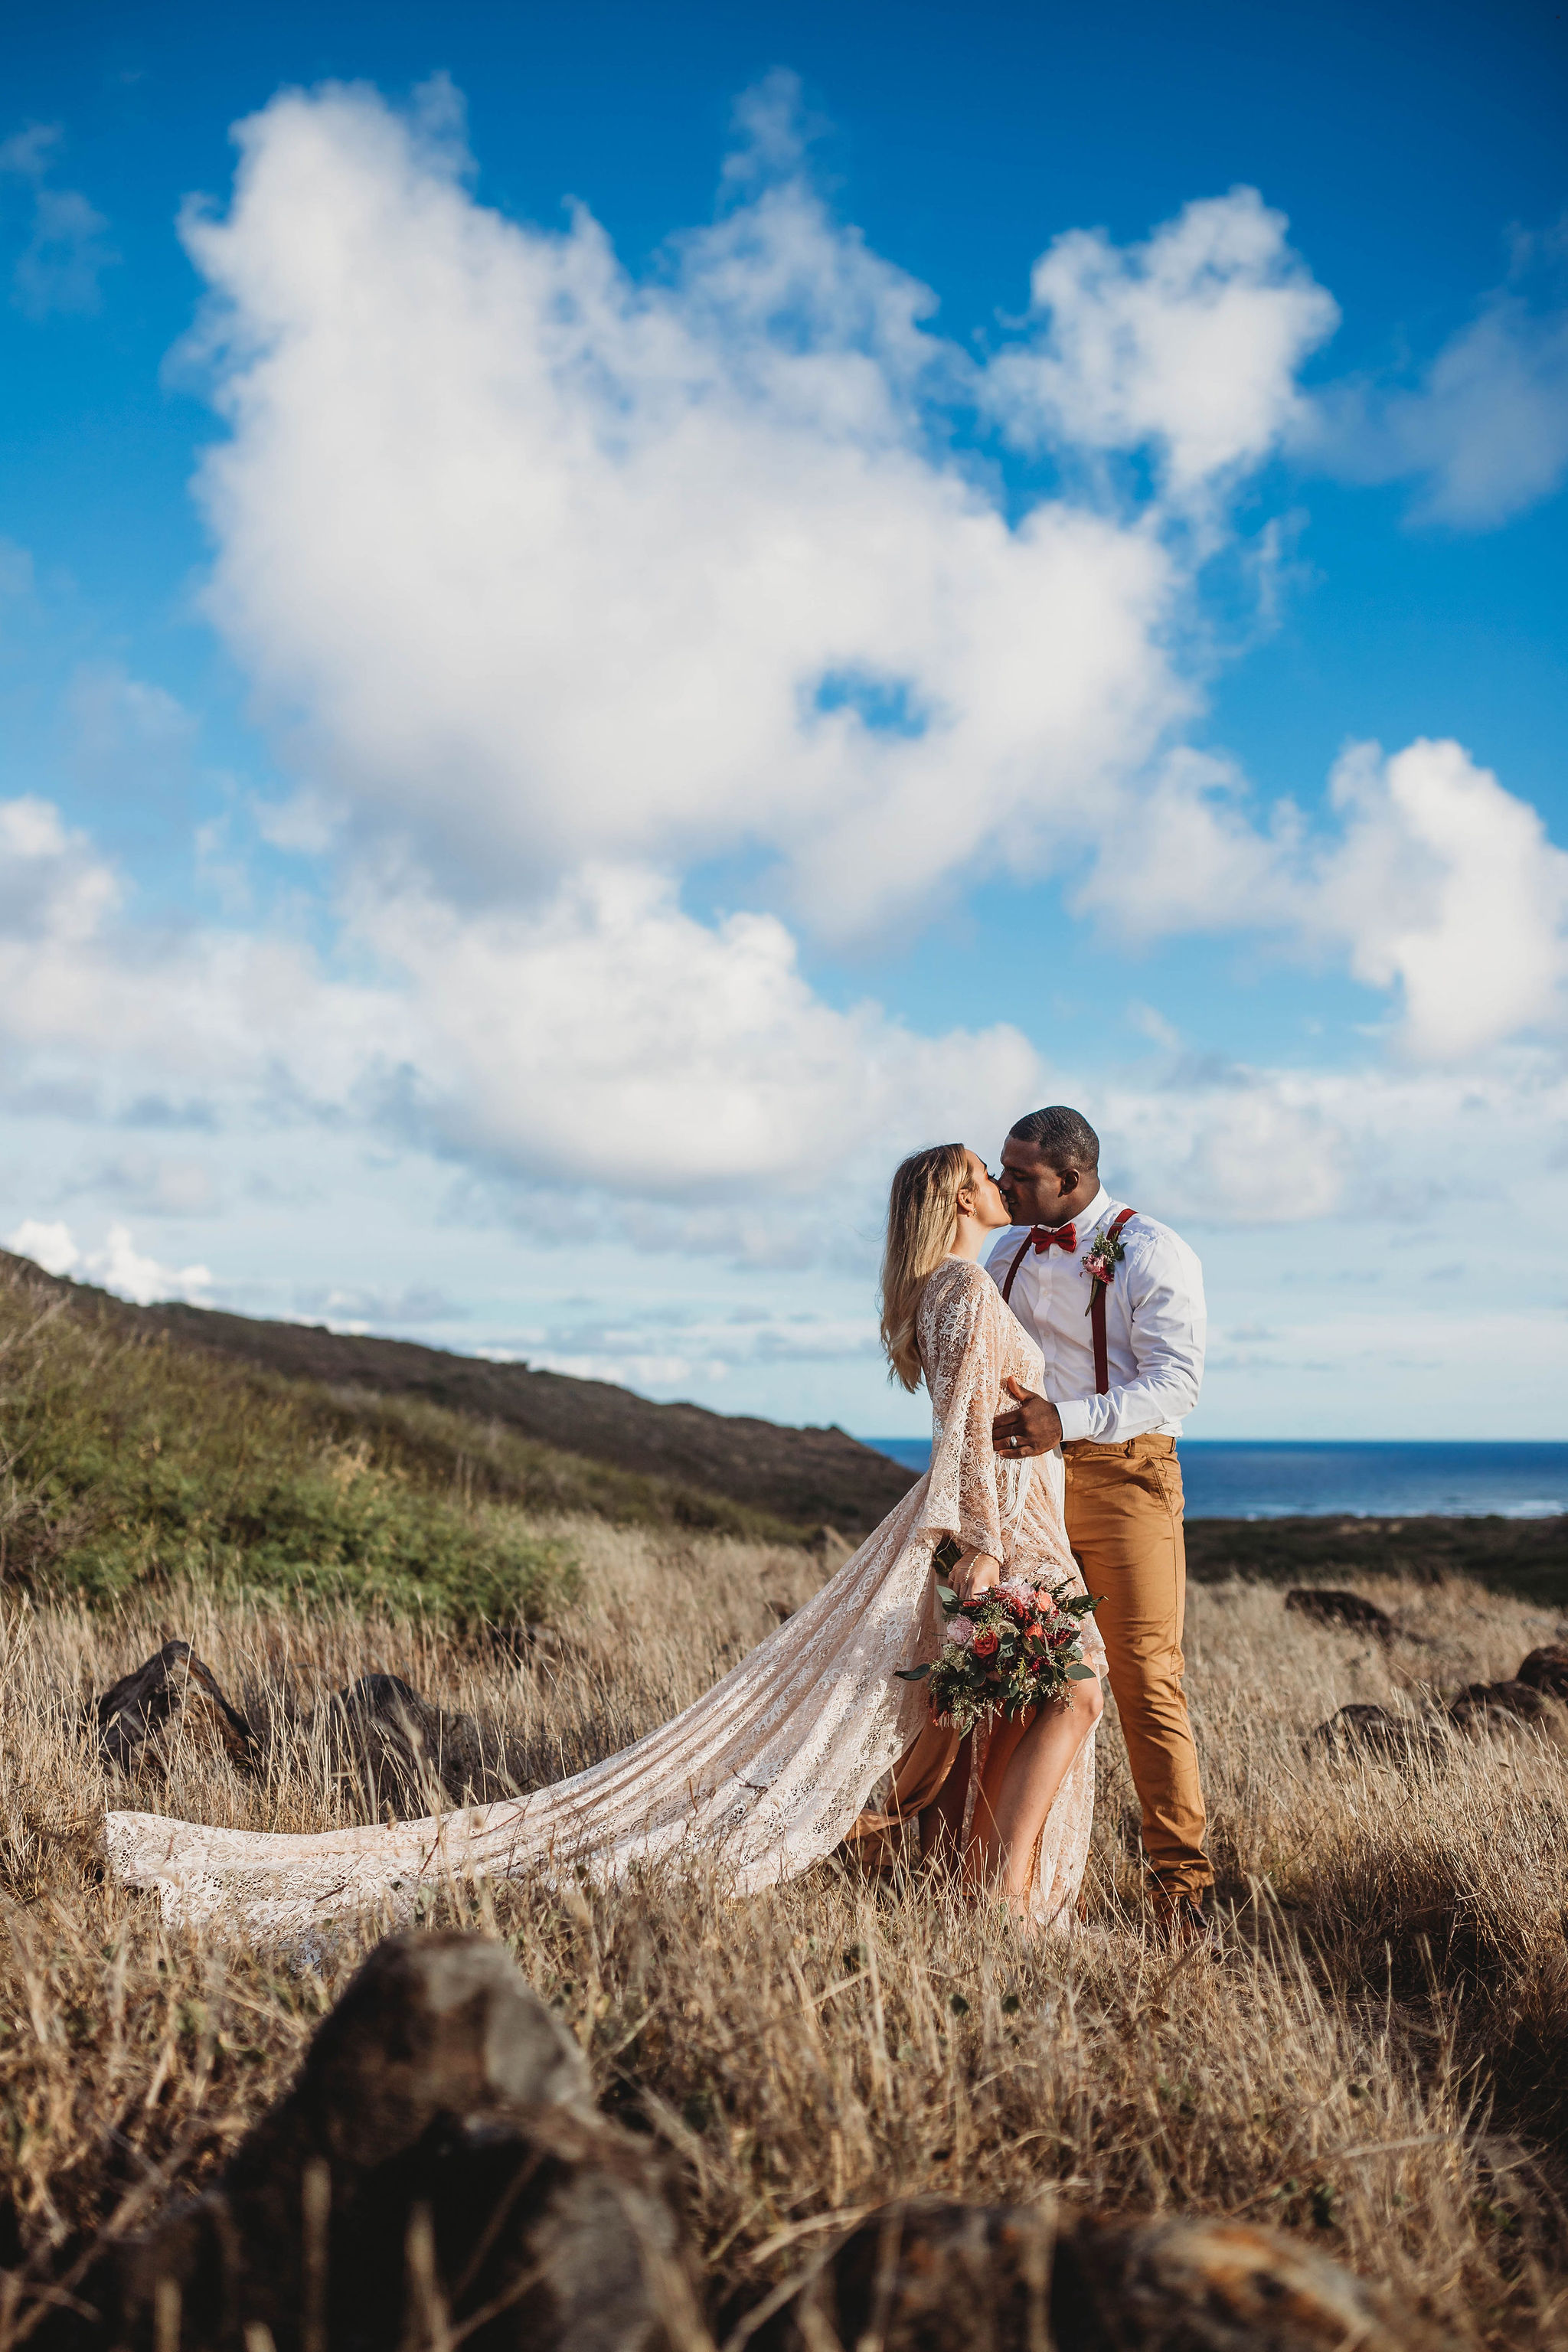 Wedding and Photographer, bride and groom kiss on a dry grassy hill near the ocean